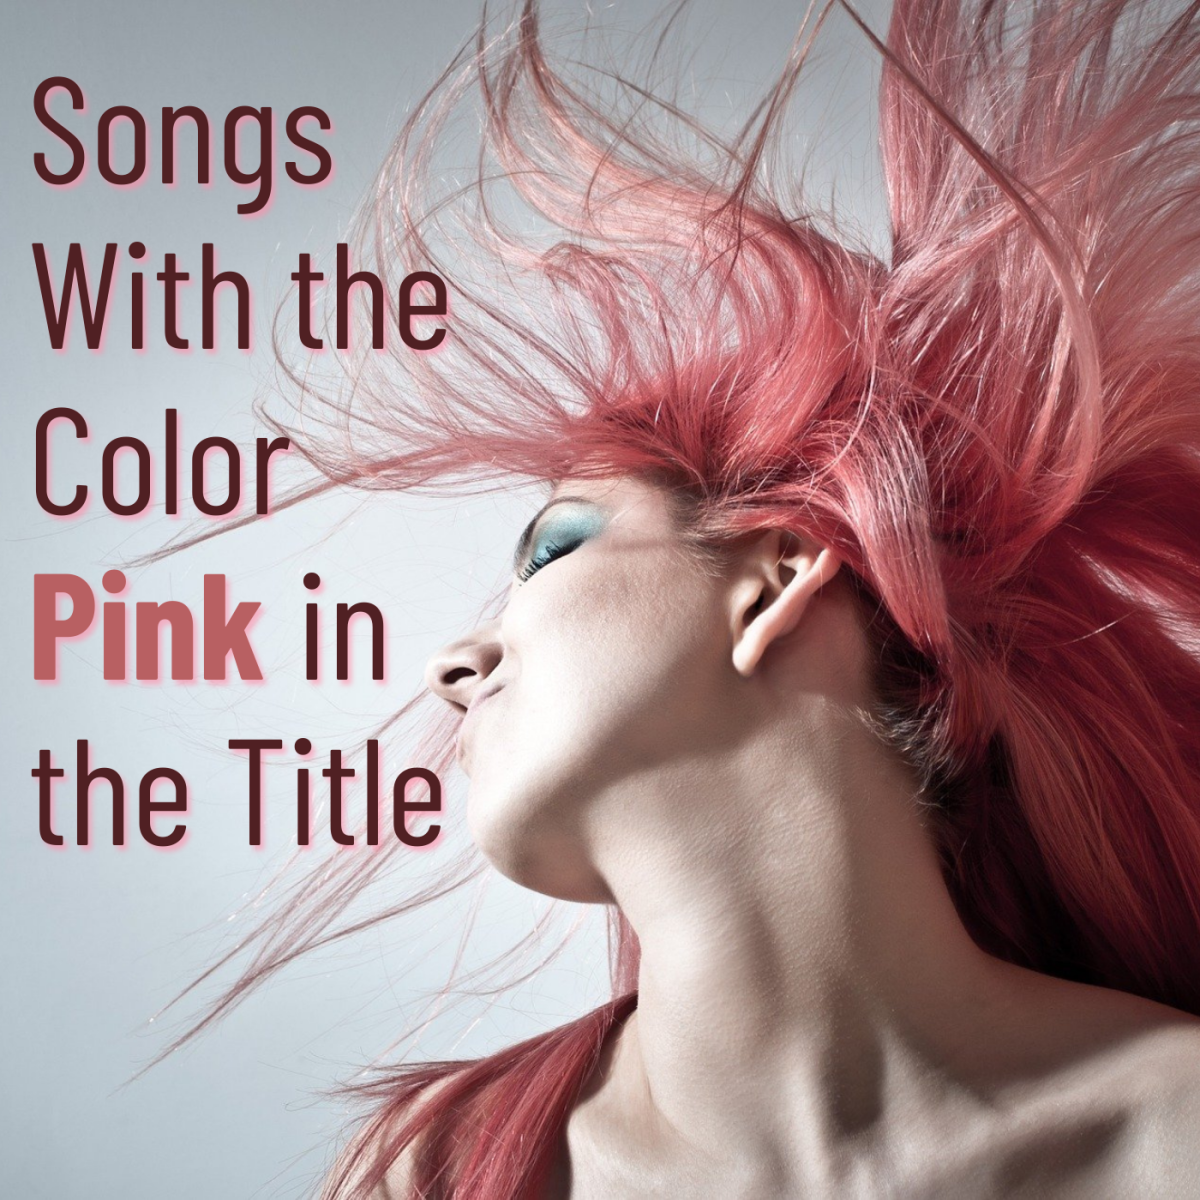 32 Songs With the Color Pink in the Title